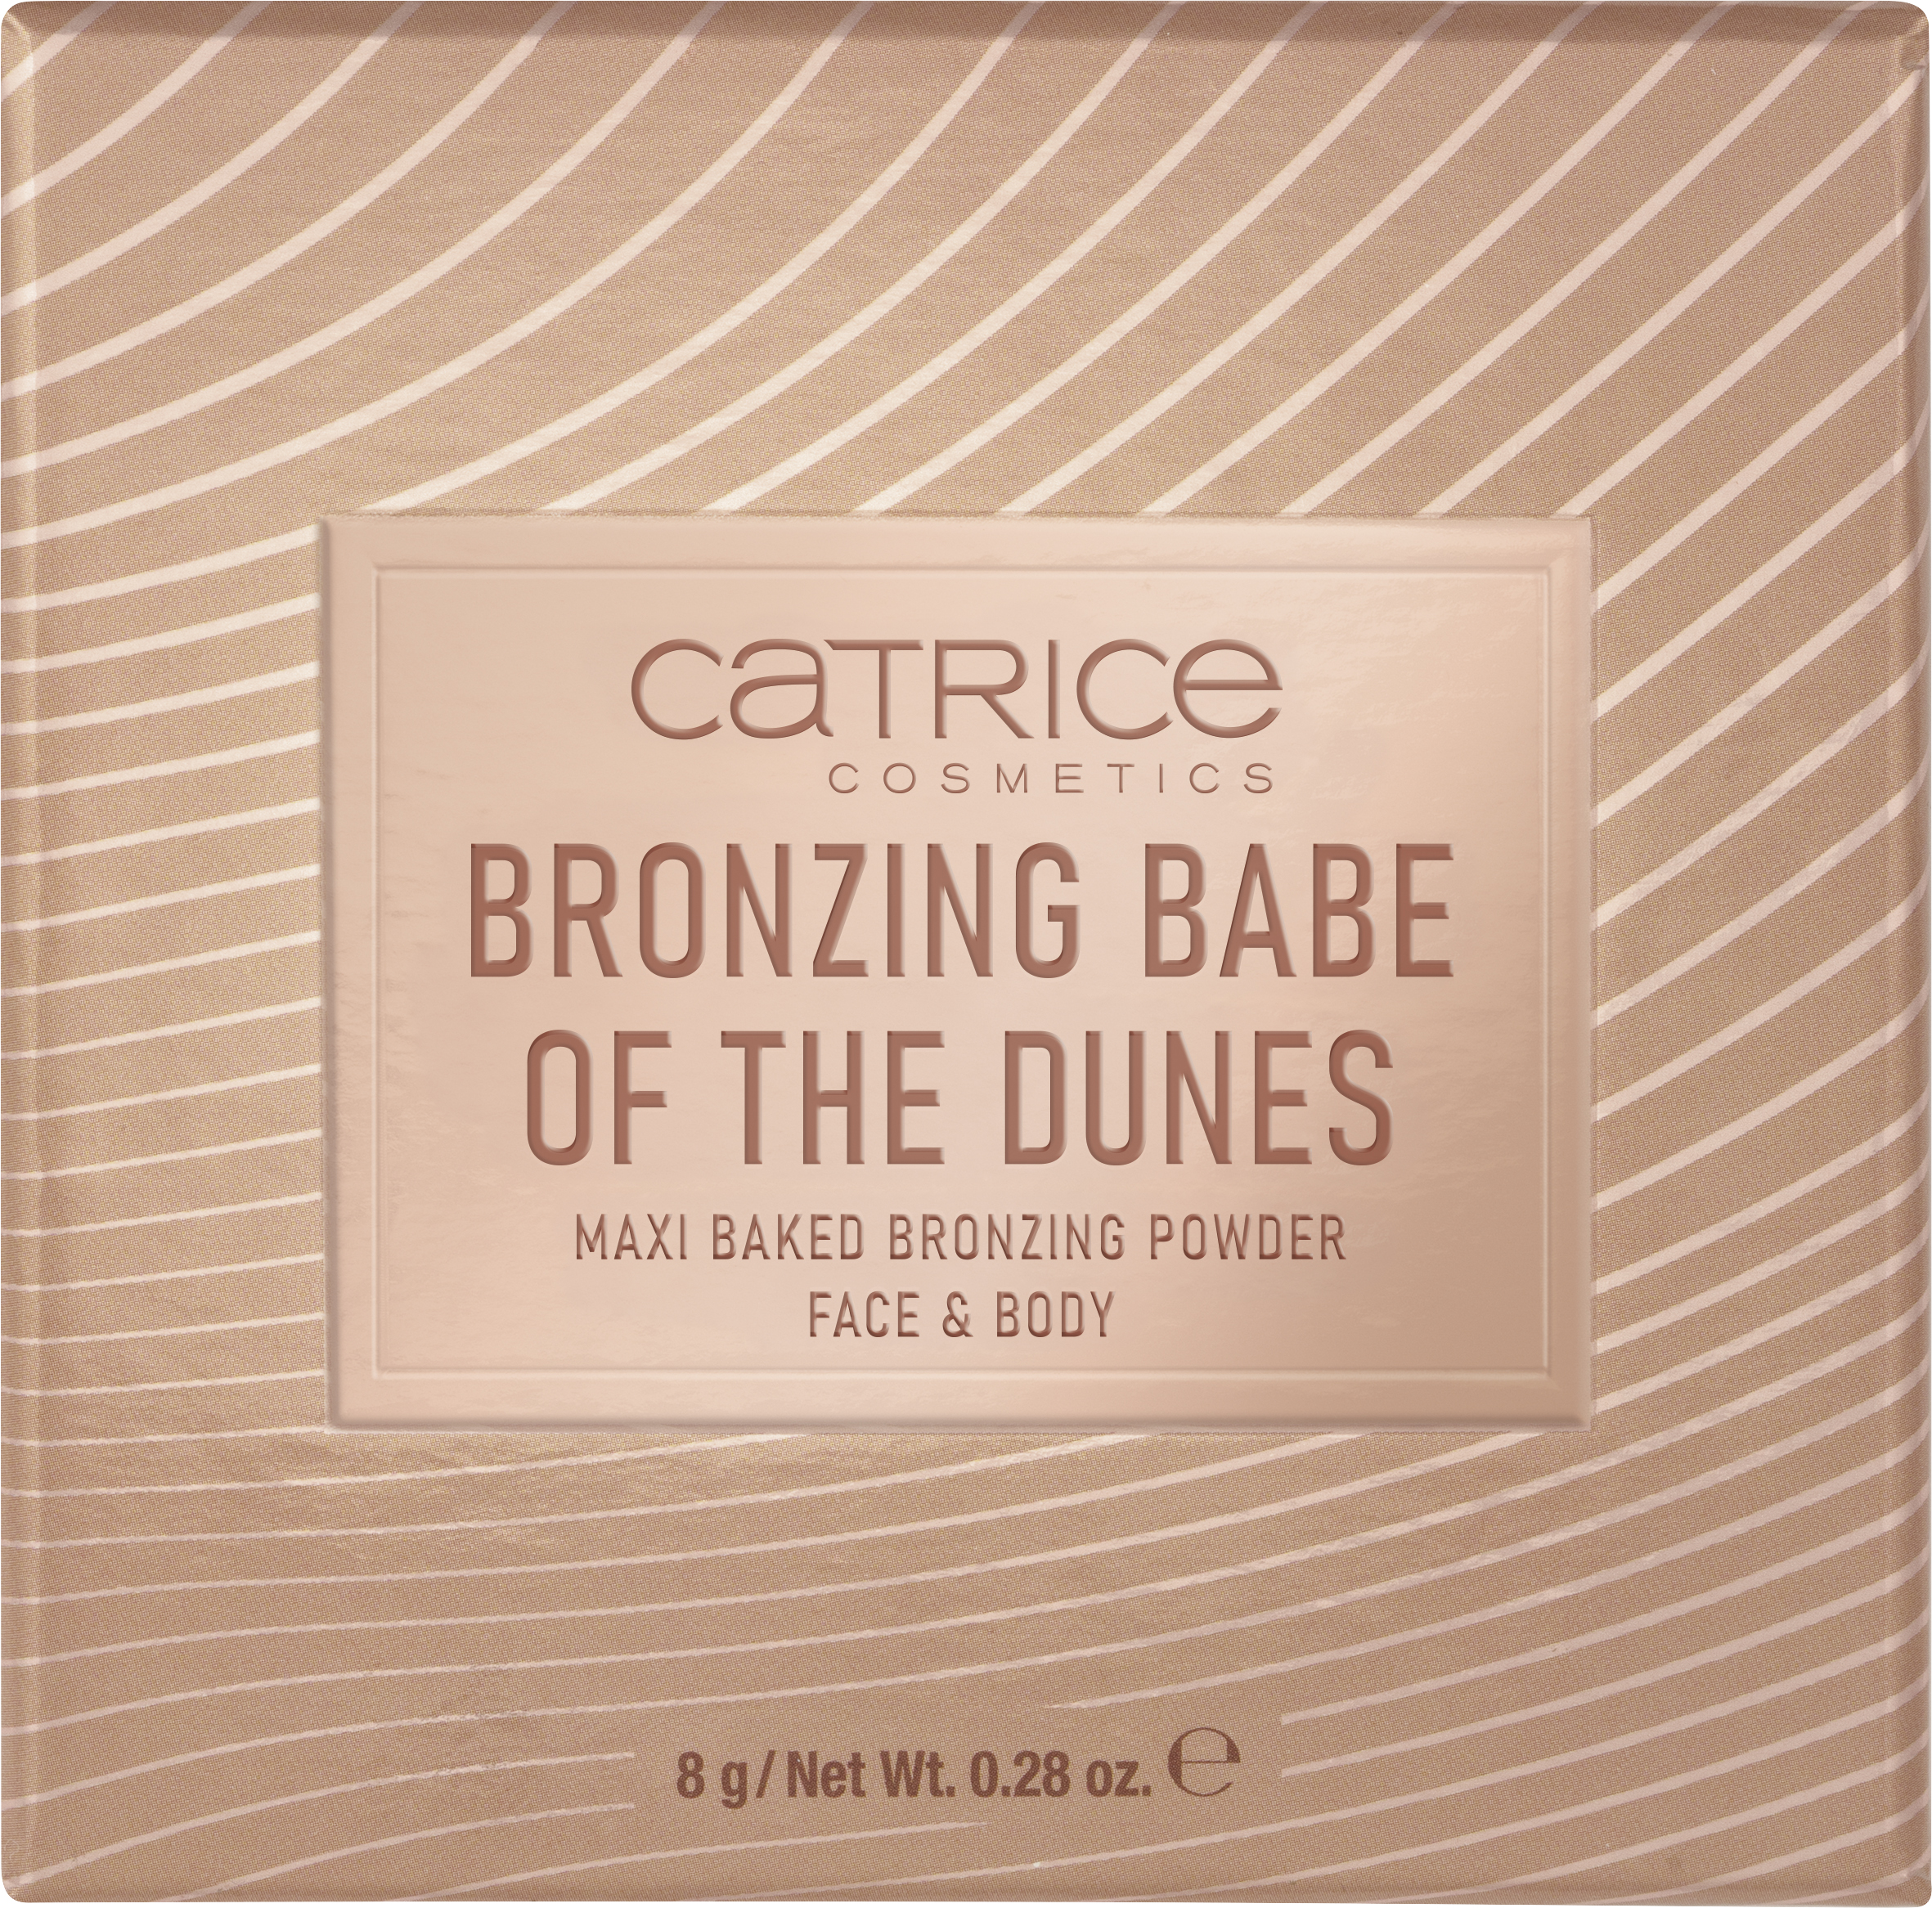 Catrice Tansation Dunes Of The Bronzing Queensize 10 Babe